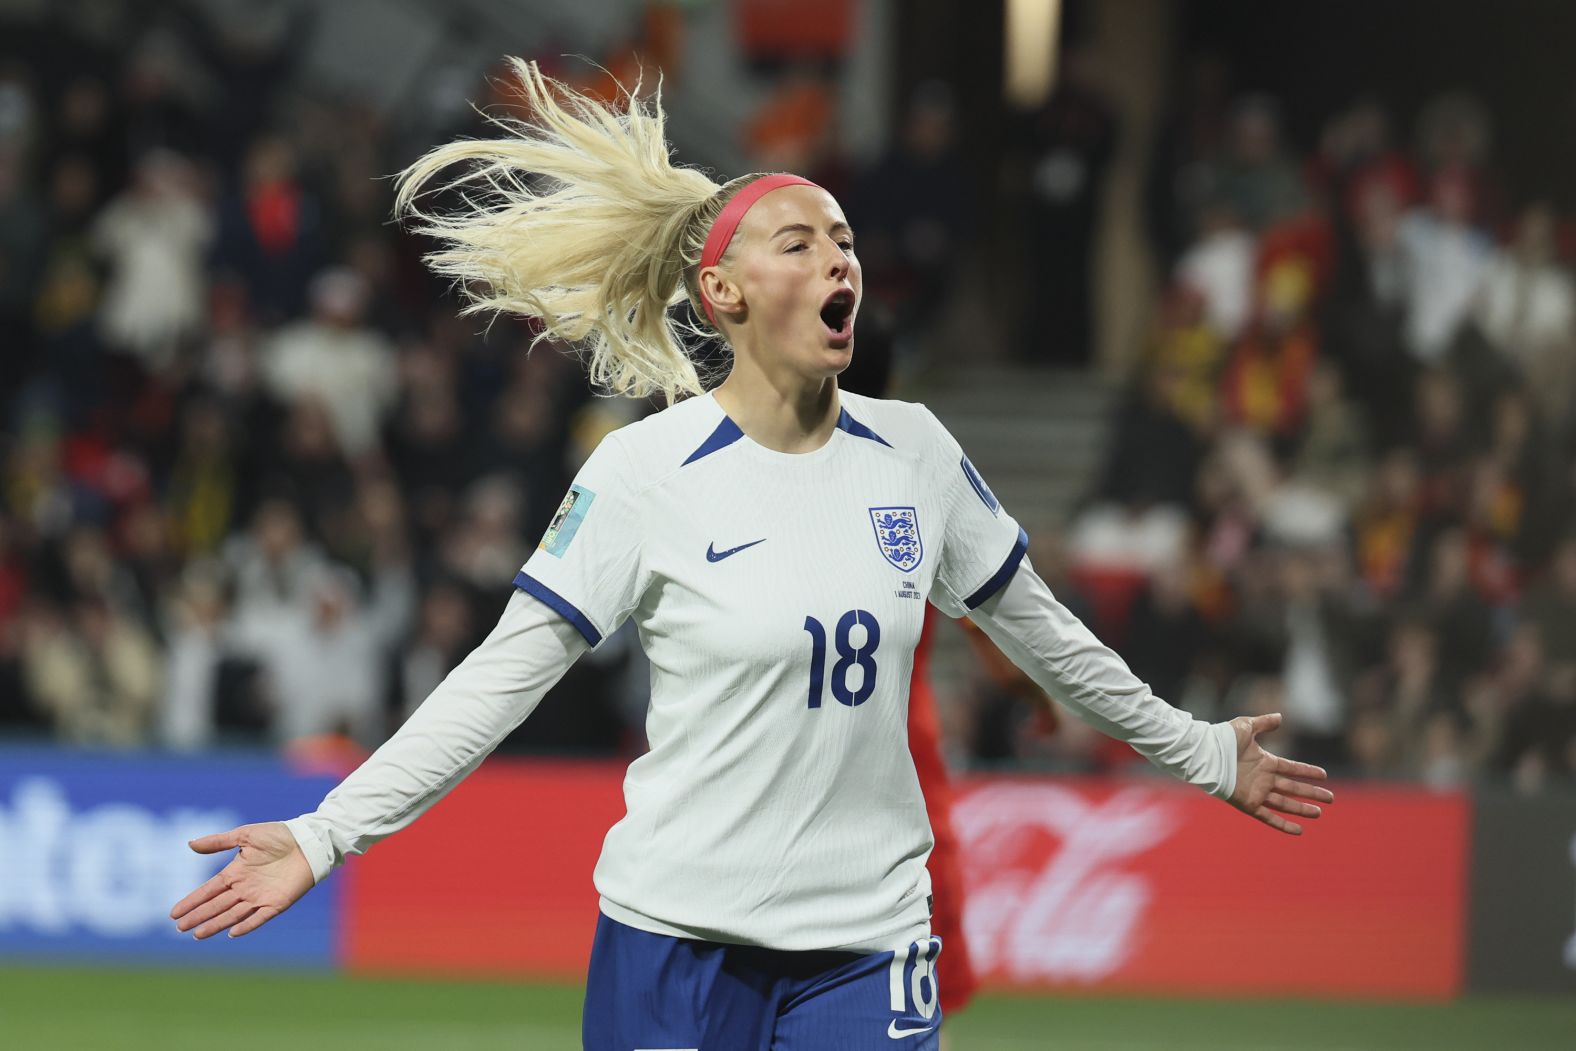 England's Chloe Kelly celebrates after scoring against China on August 1. <a href="index.php?page=&url=https%3A%2F%2Fwww.cnn.com%2Fsport%2Flive-news%2Fuswnt-portugal-group-stage-womens-world-cup-08-01-23%2Fh_986c8e469f4fb778cf1e325cdfb2fc90" target="_blank">England won 6-1</a> to advance to the tournament's round of 16.